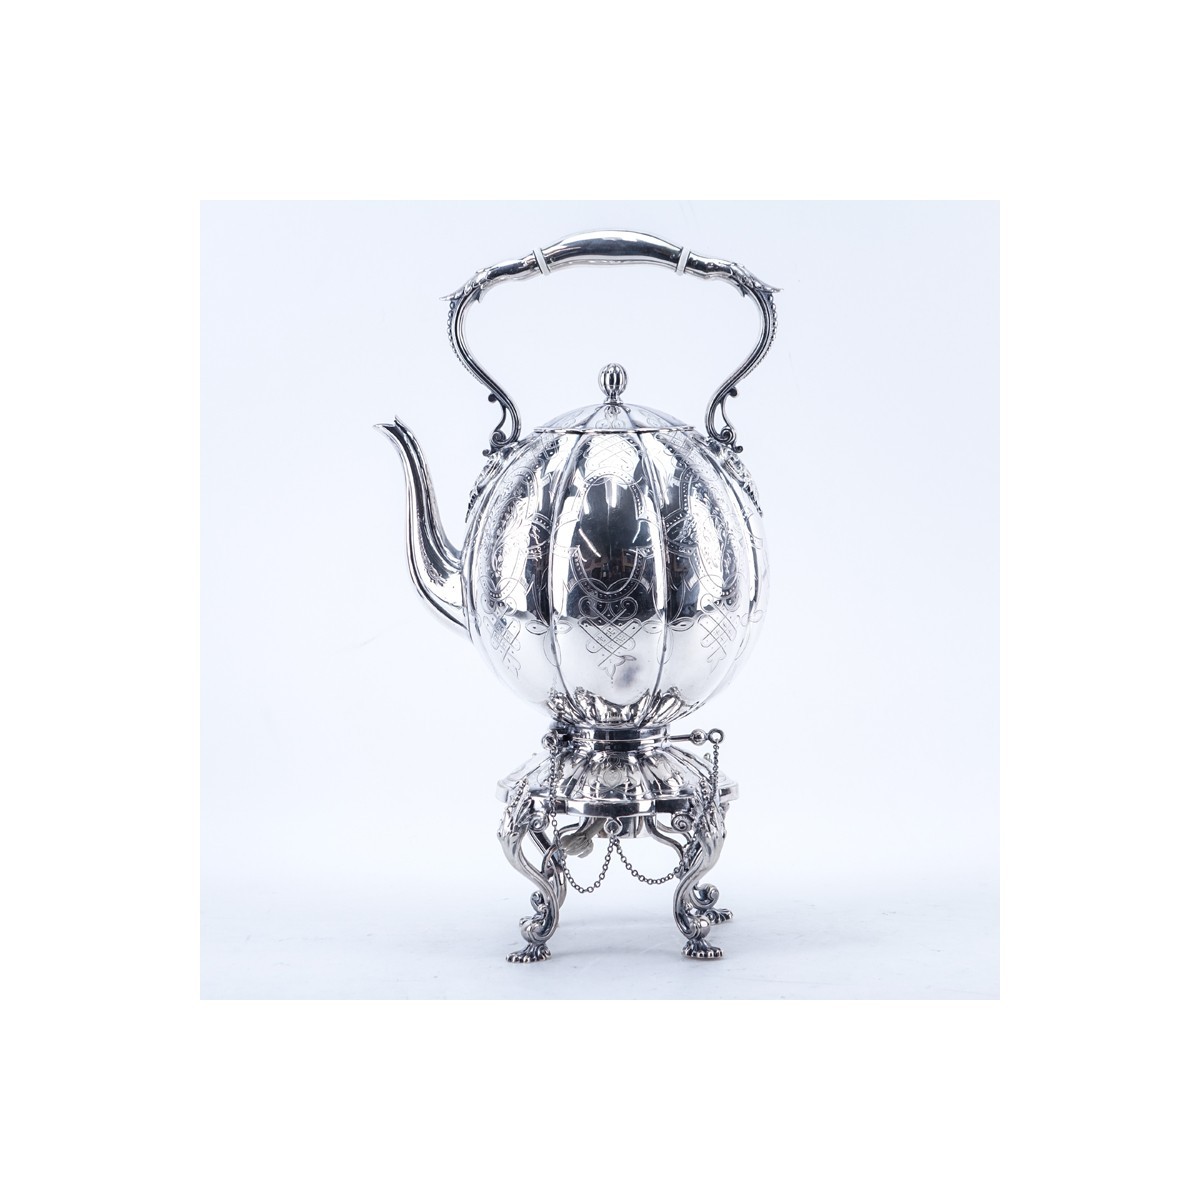 Victorian Style Silver Plated Tilting Hot Water Kettle on Stand. Unsigned.